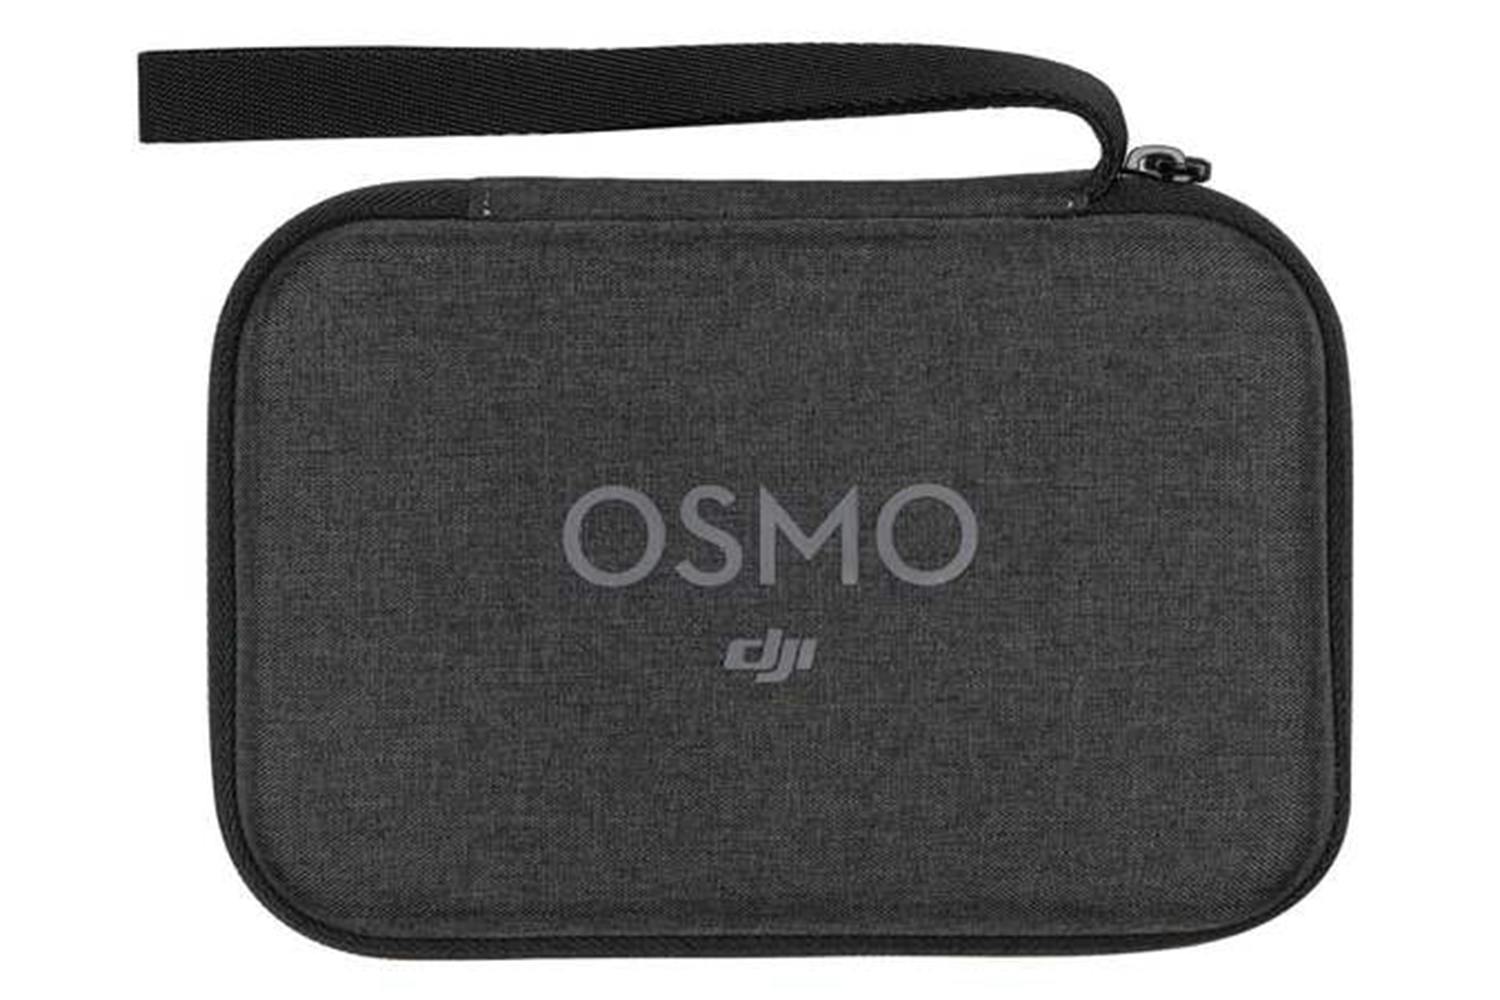 DJI Osmo Mobile 3 Carrying Case | Part 2